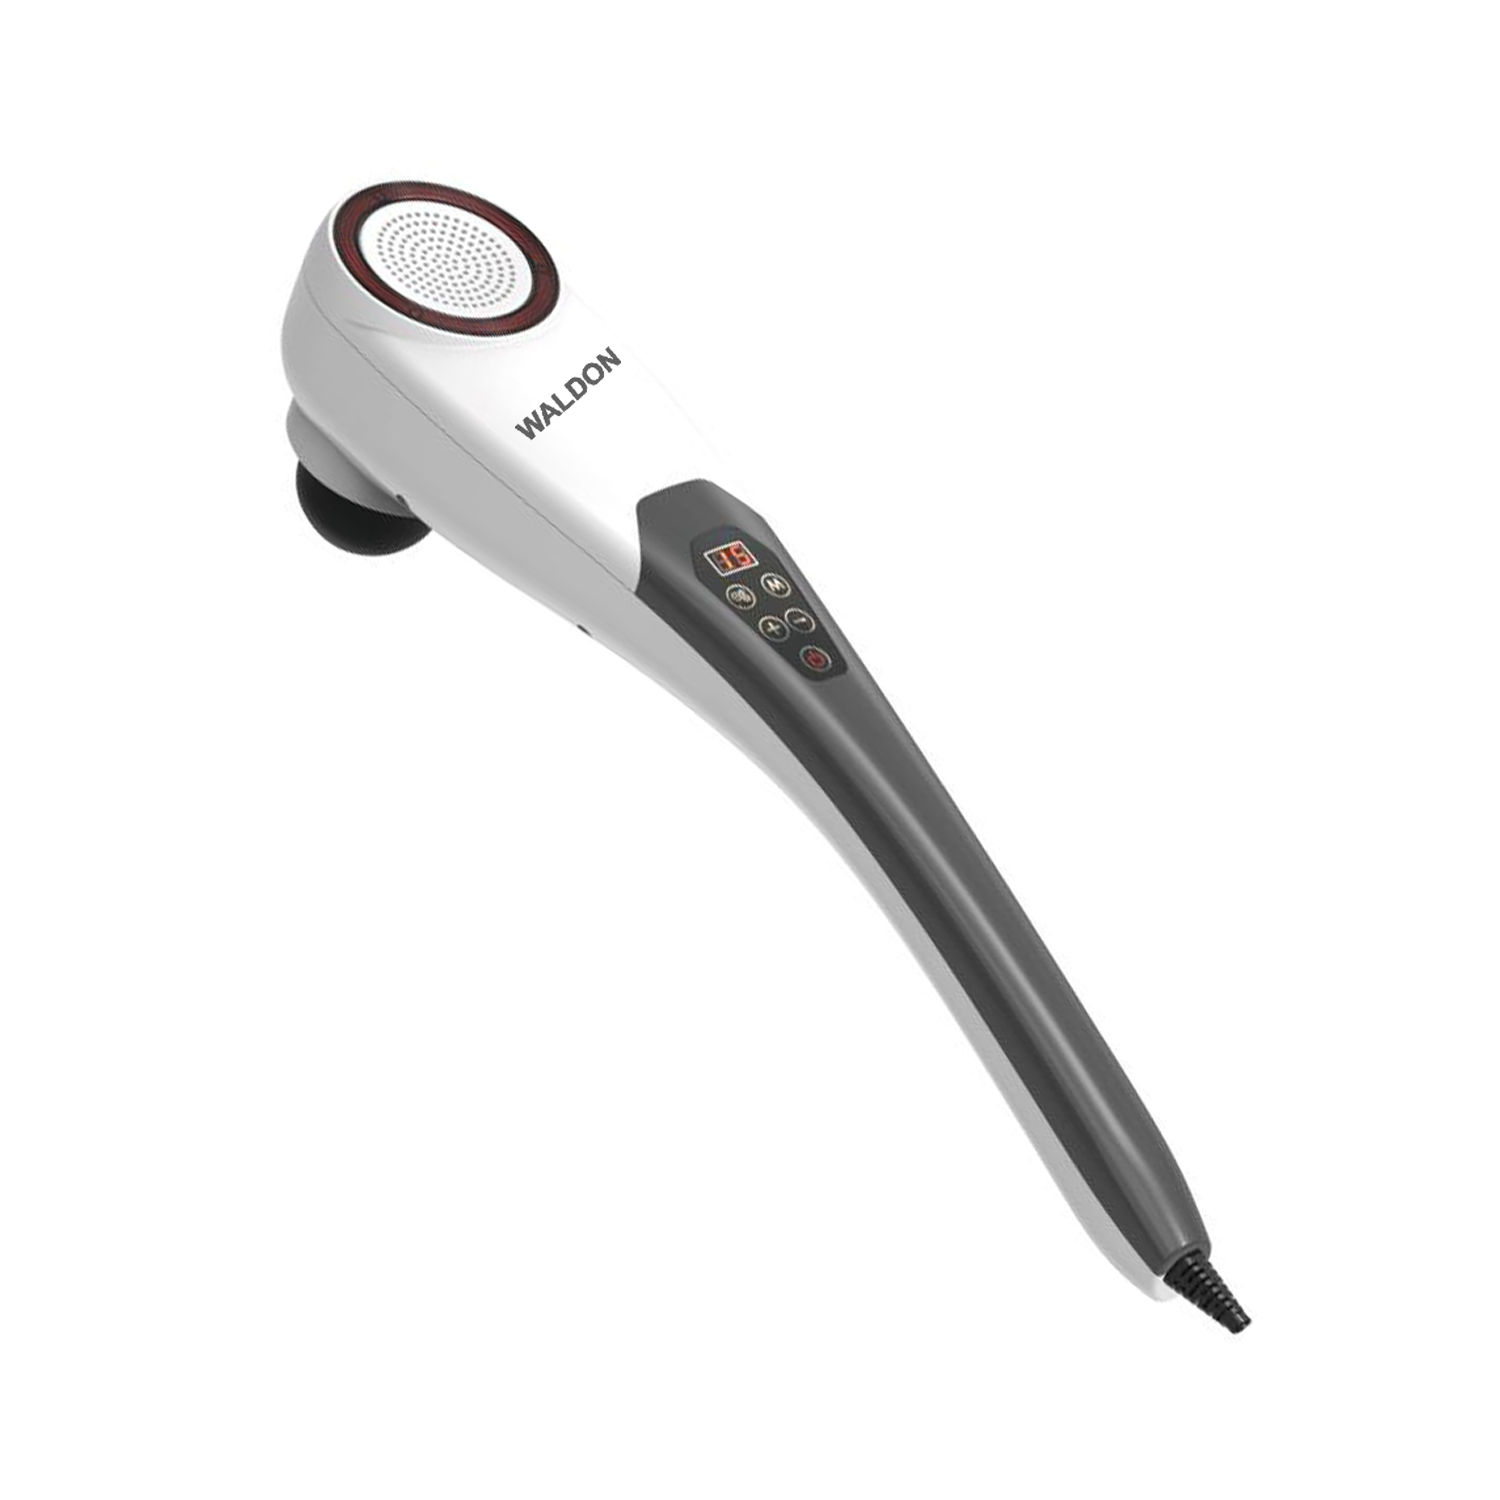 Waldon By Dr. Odin Electric Multi-functional Handheld Full Body Hammer Massager